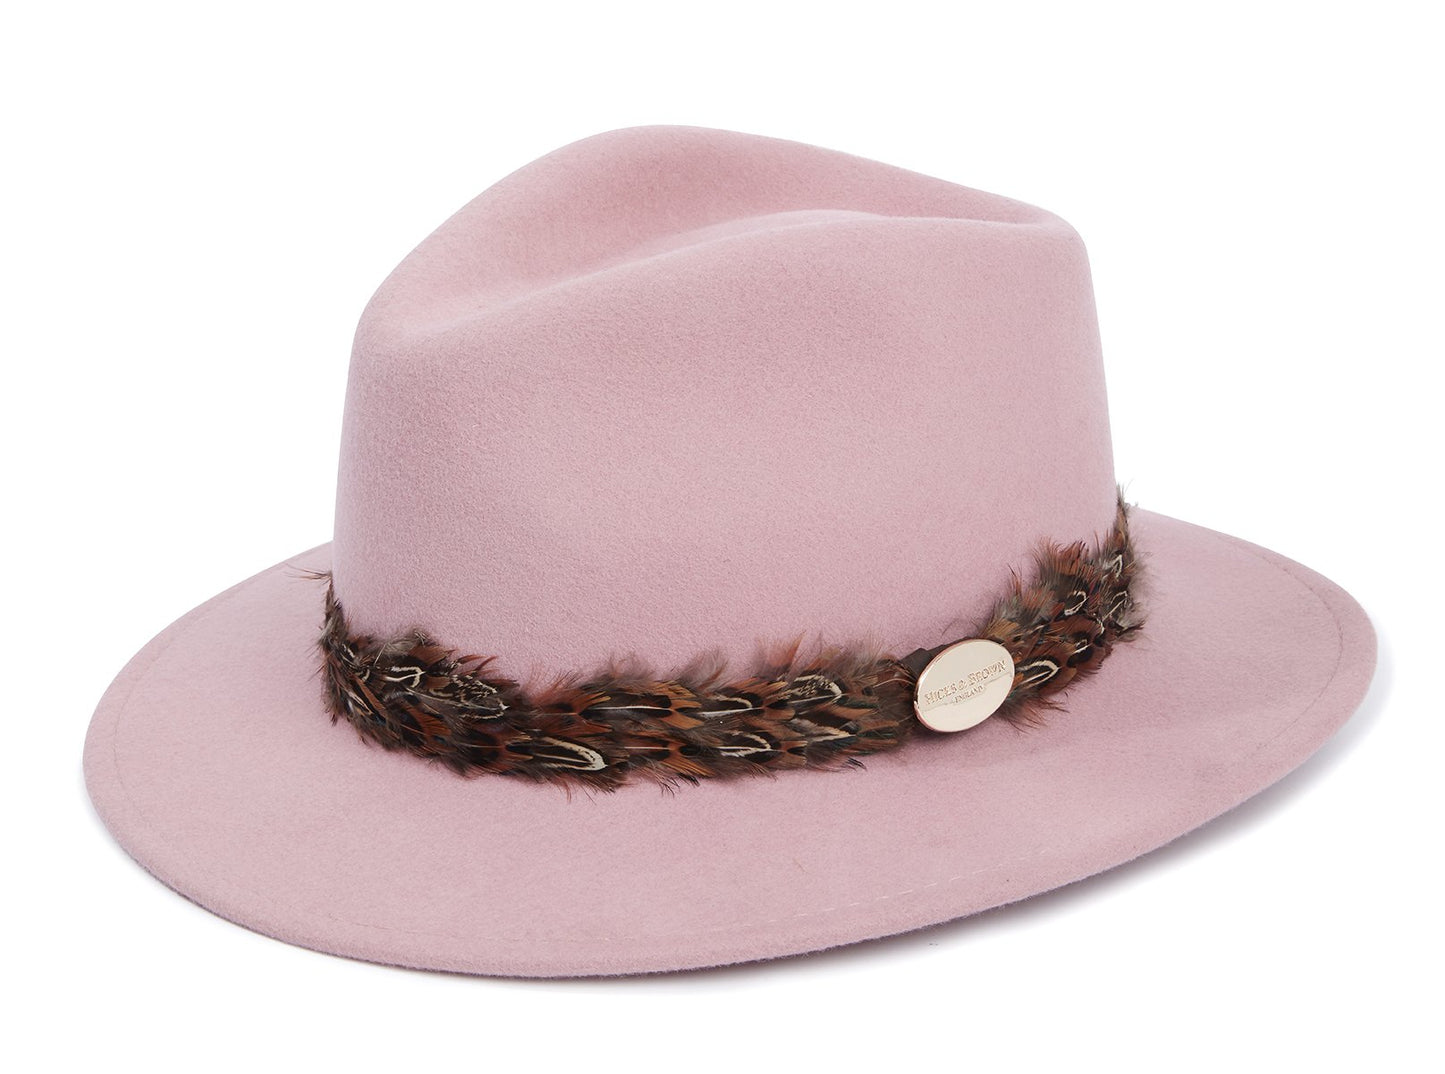 Hicks & Brown Fedora The Suffolk Fedora in Dusky Pink (Pheasant Feather Wrap)